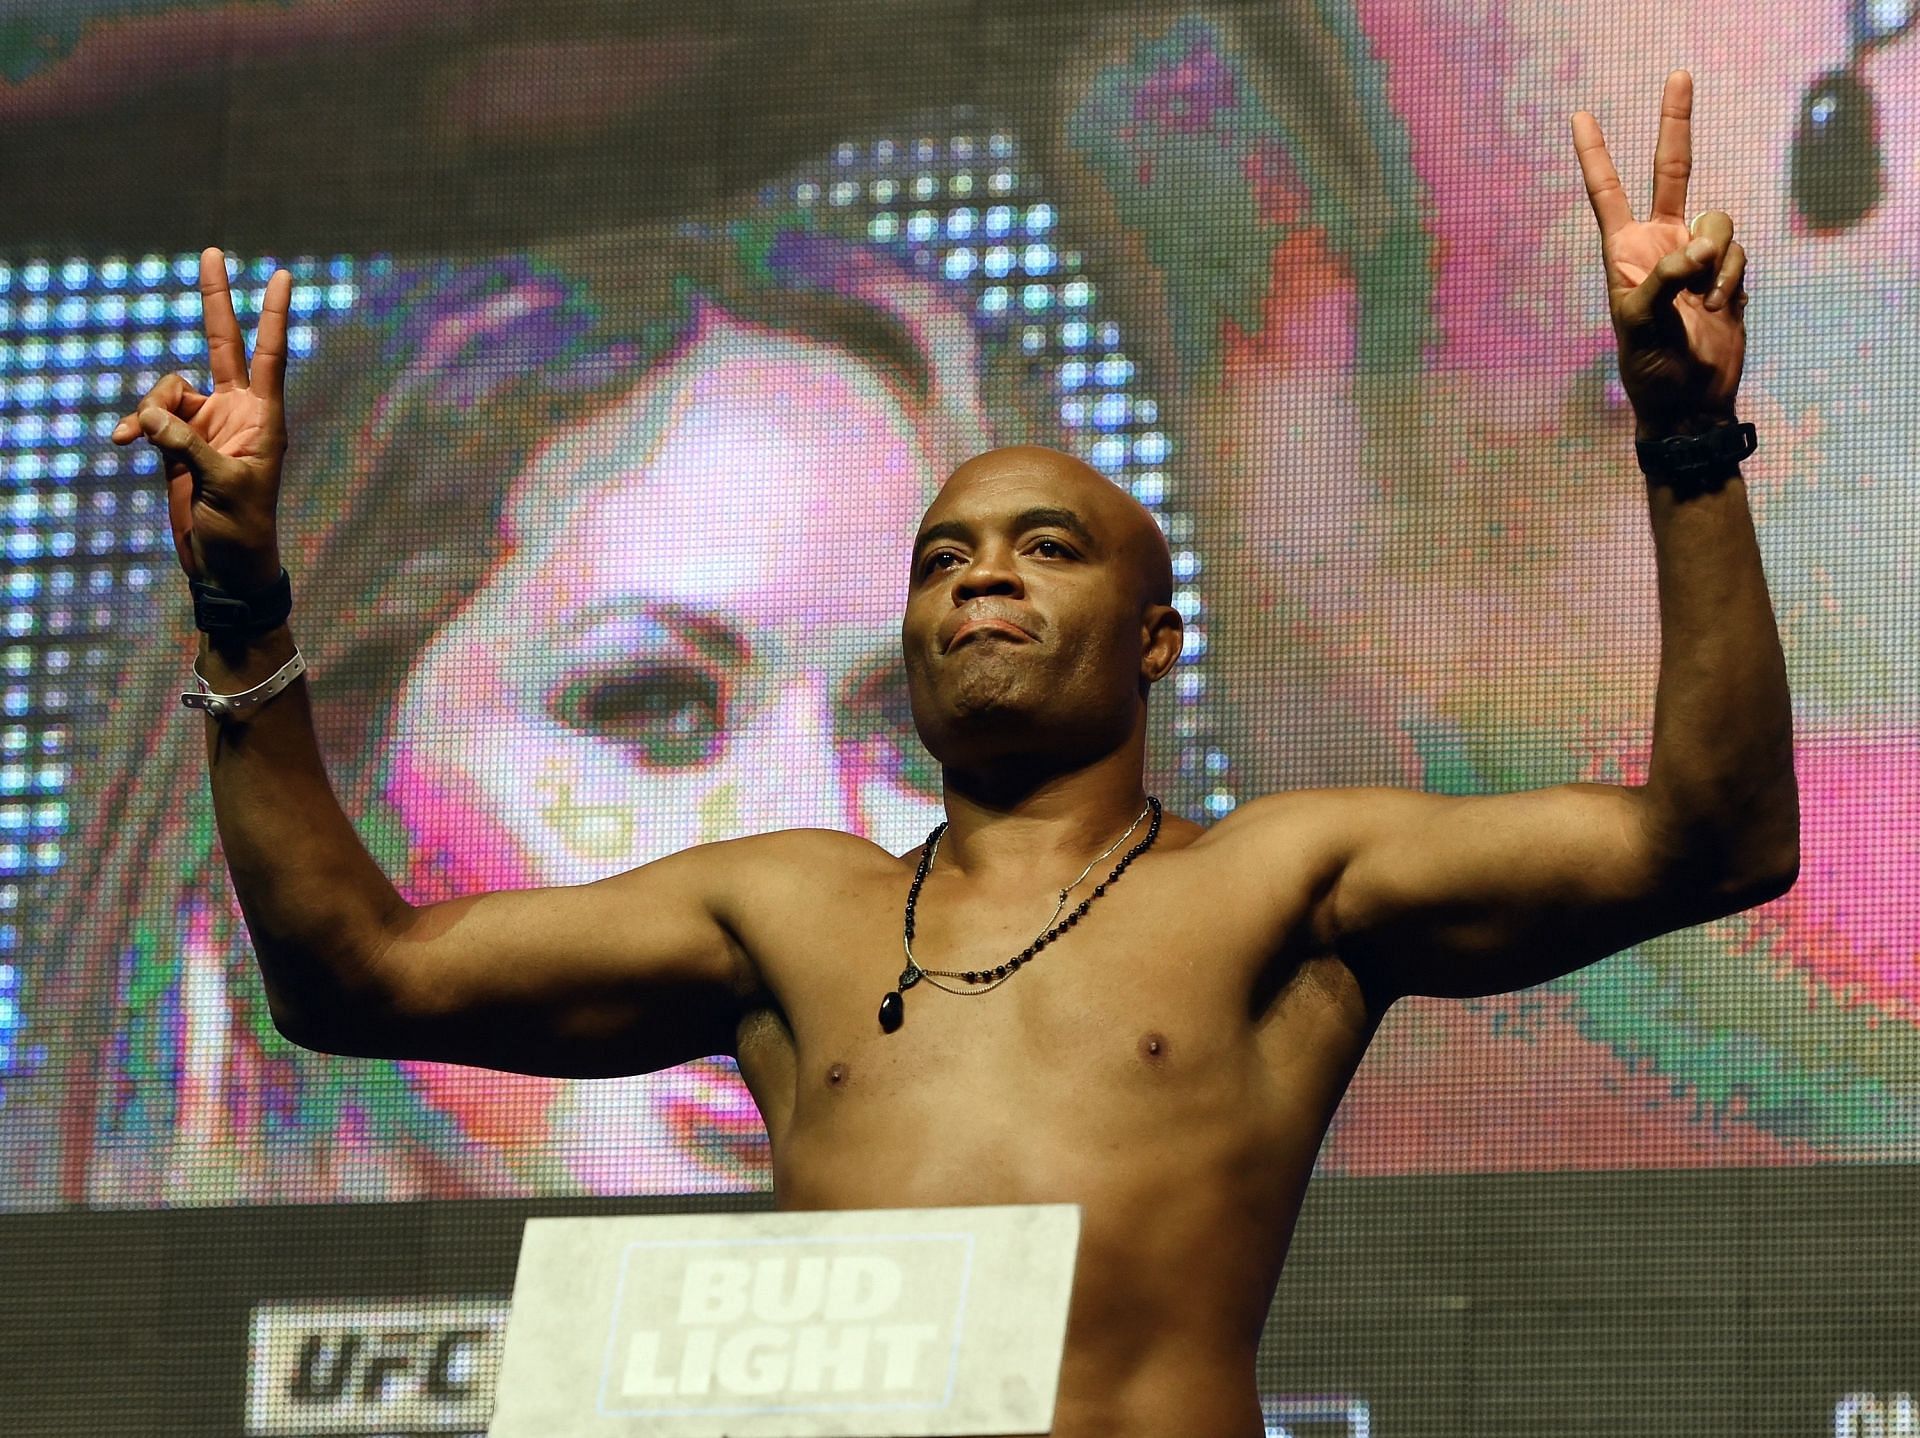 Anderson Silva produced a virtuoso showing to down Forrest Griffin in 2009